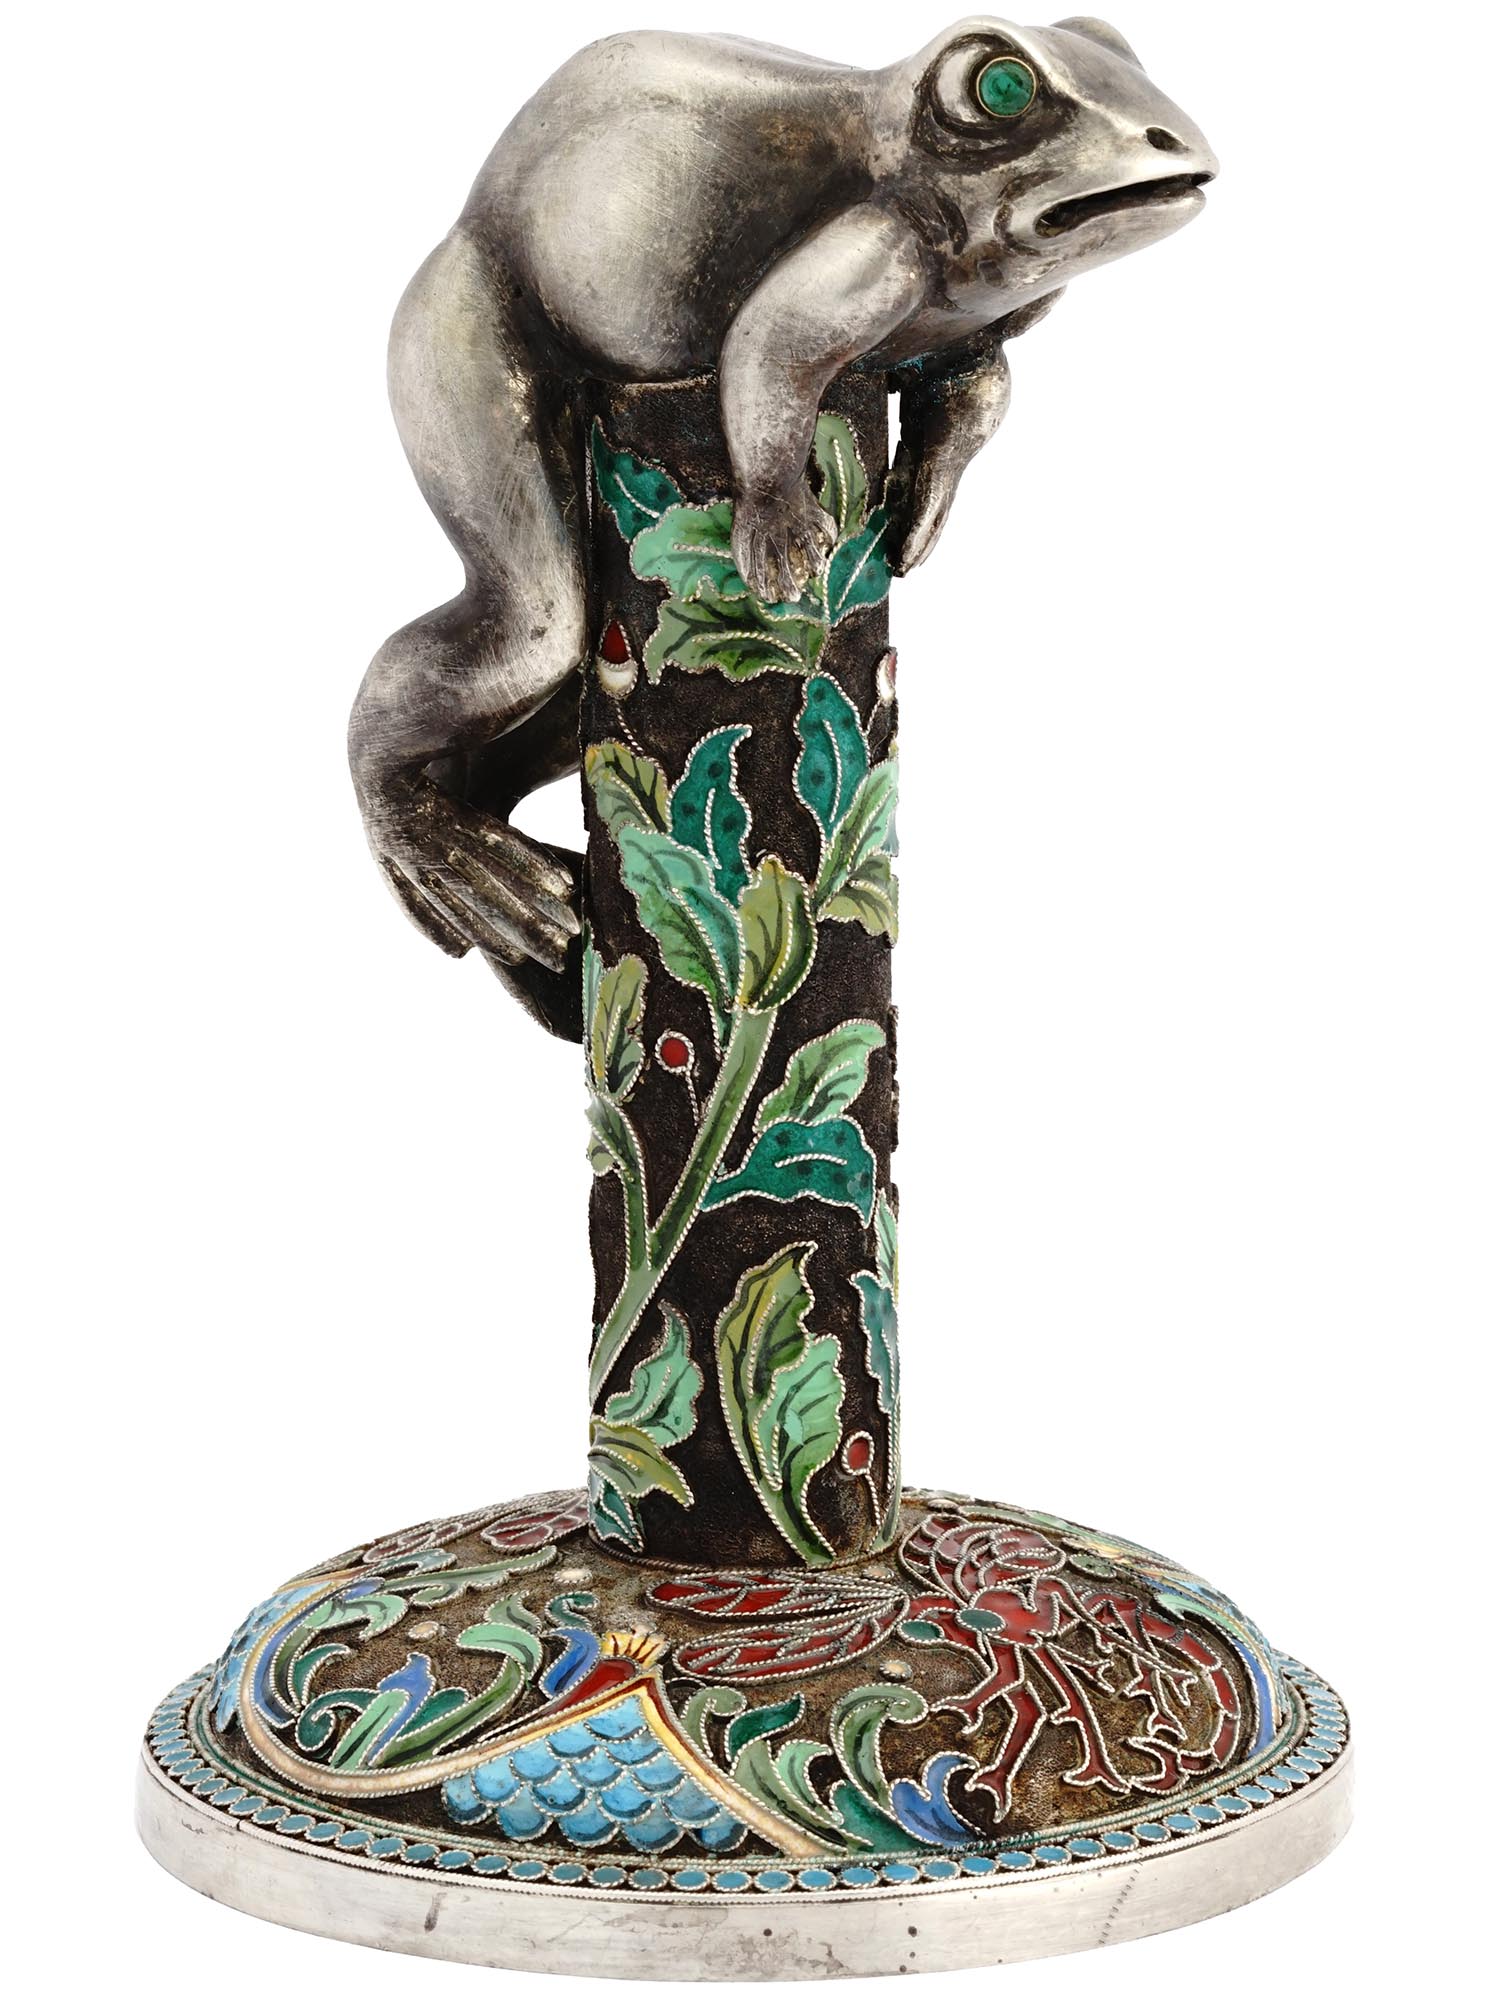 RUSSIAN SILVER FROG FIGURE ON SILVER ENAMEL STAND PIC-0